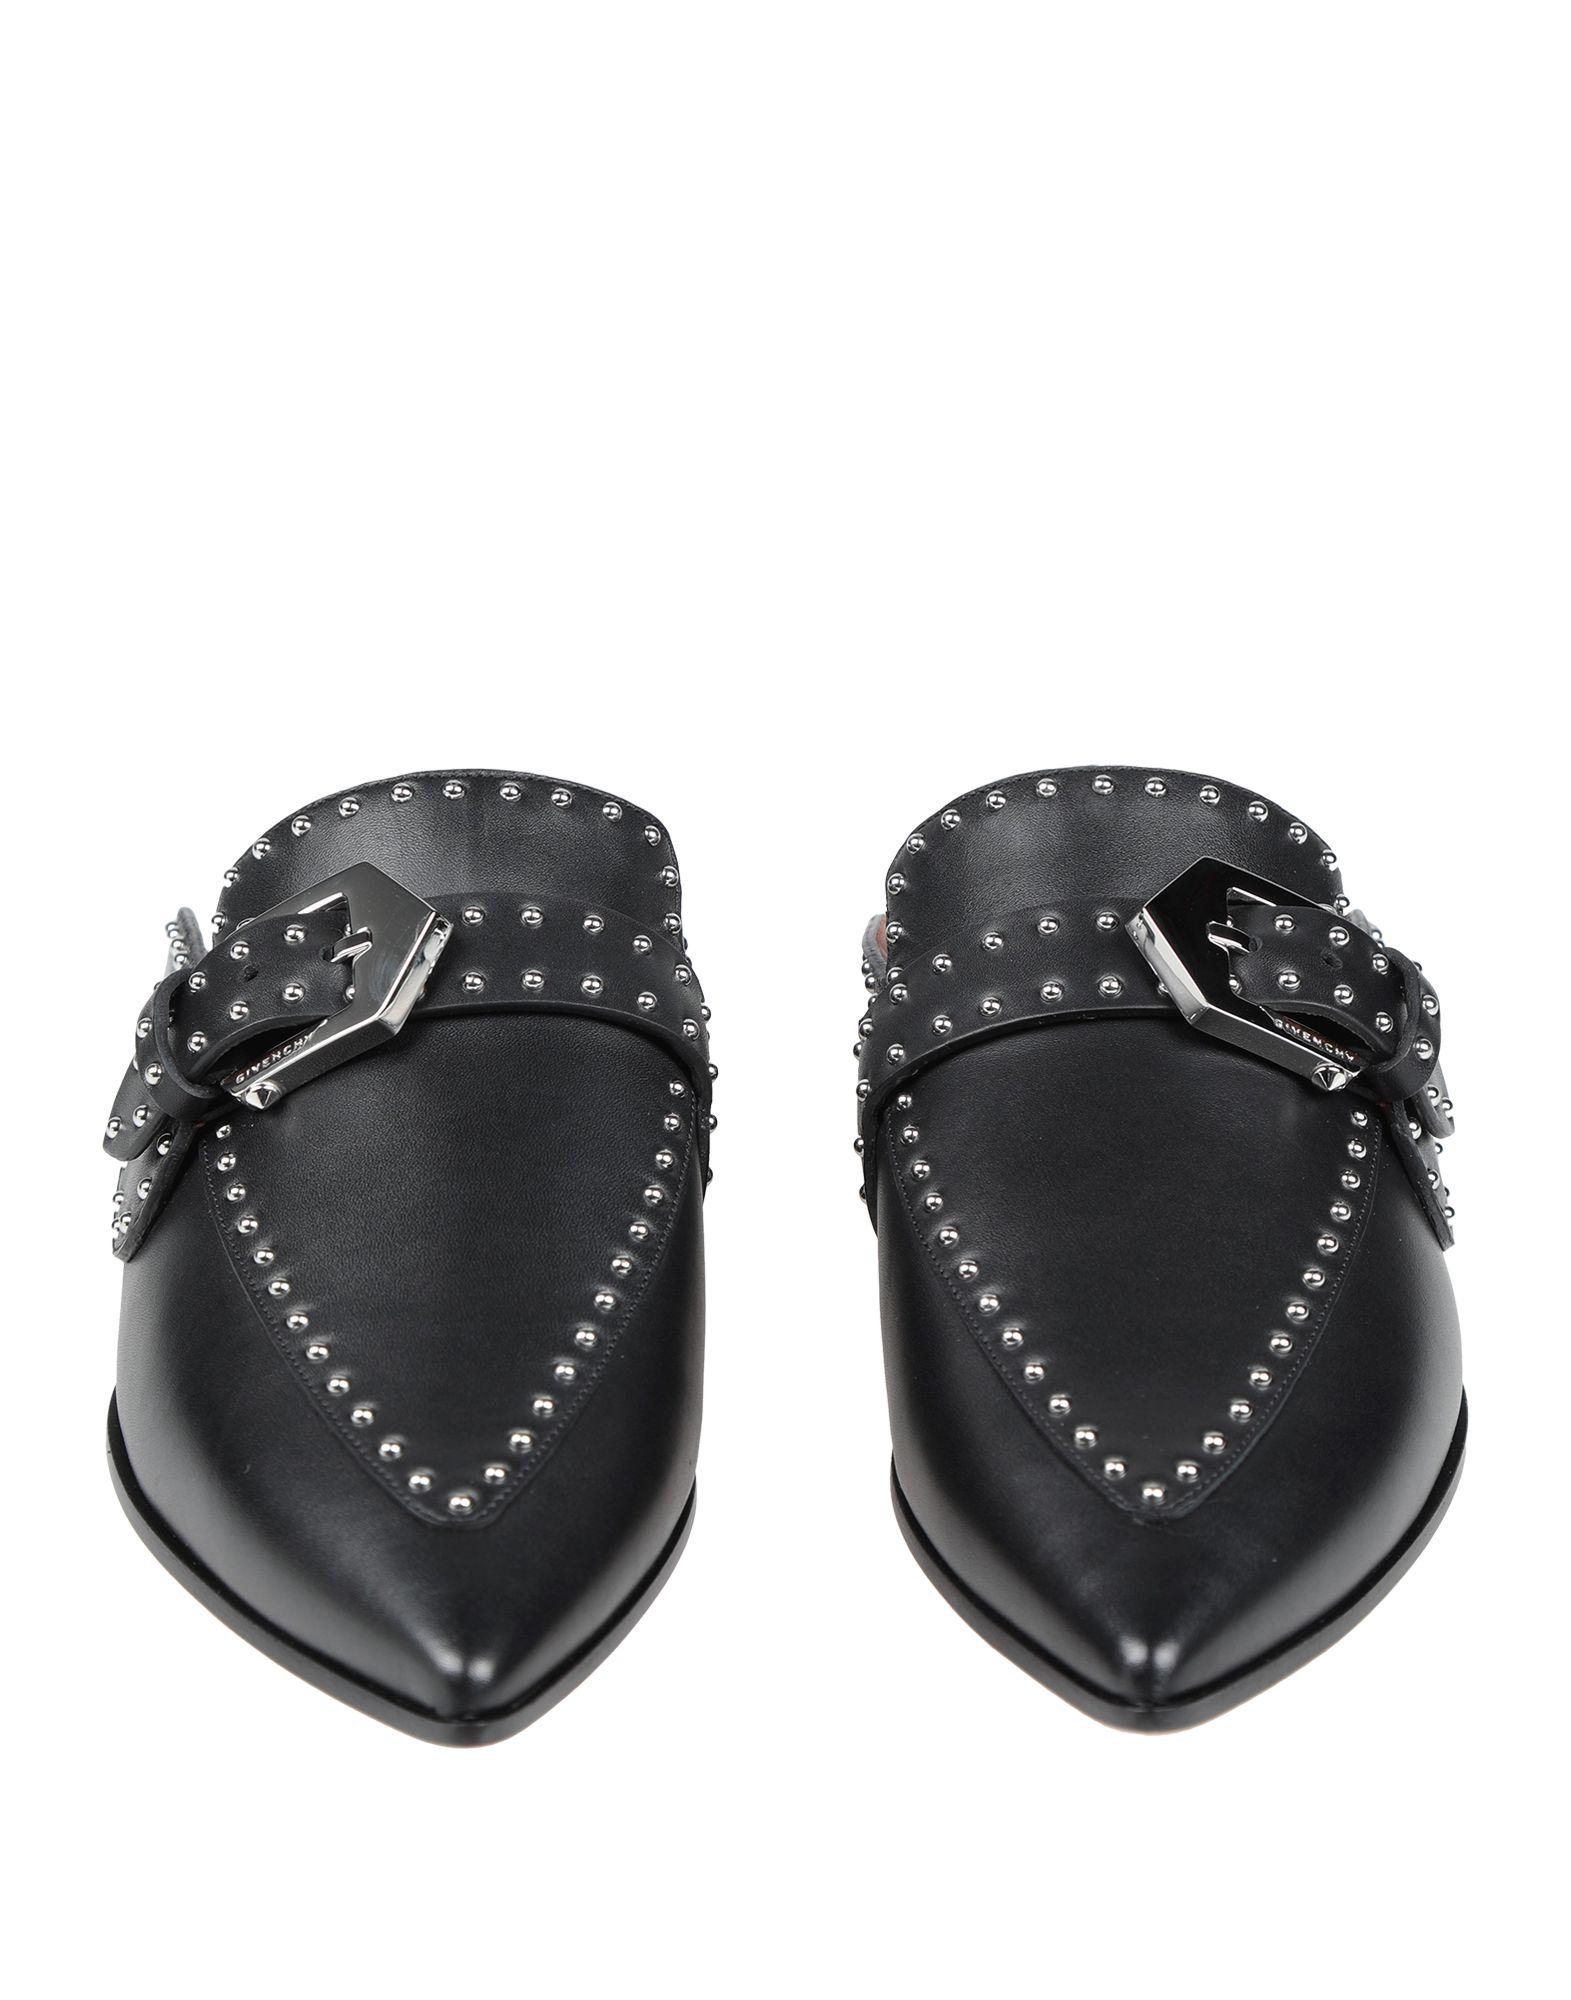 Givenchy Leather Mules in Black - Lyst